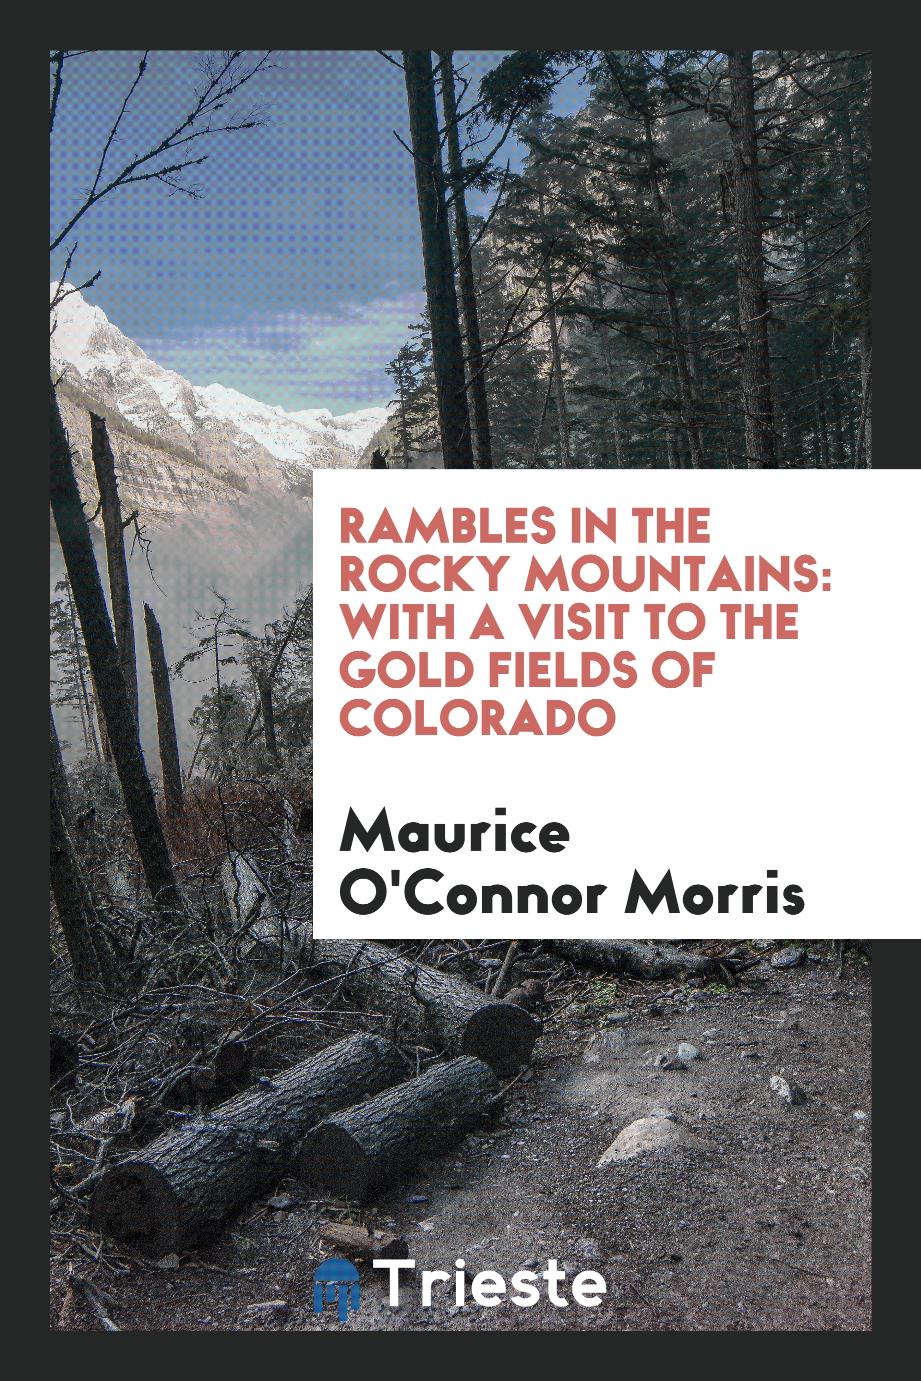 Rambles in the Rocky Mountains: with a visit to the gold fields of Colorado